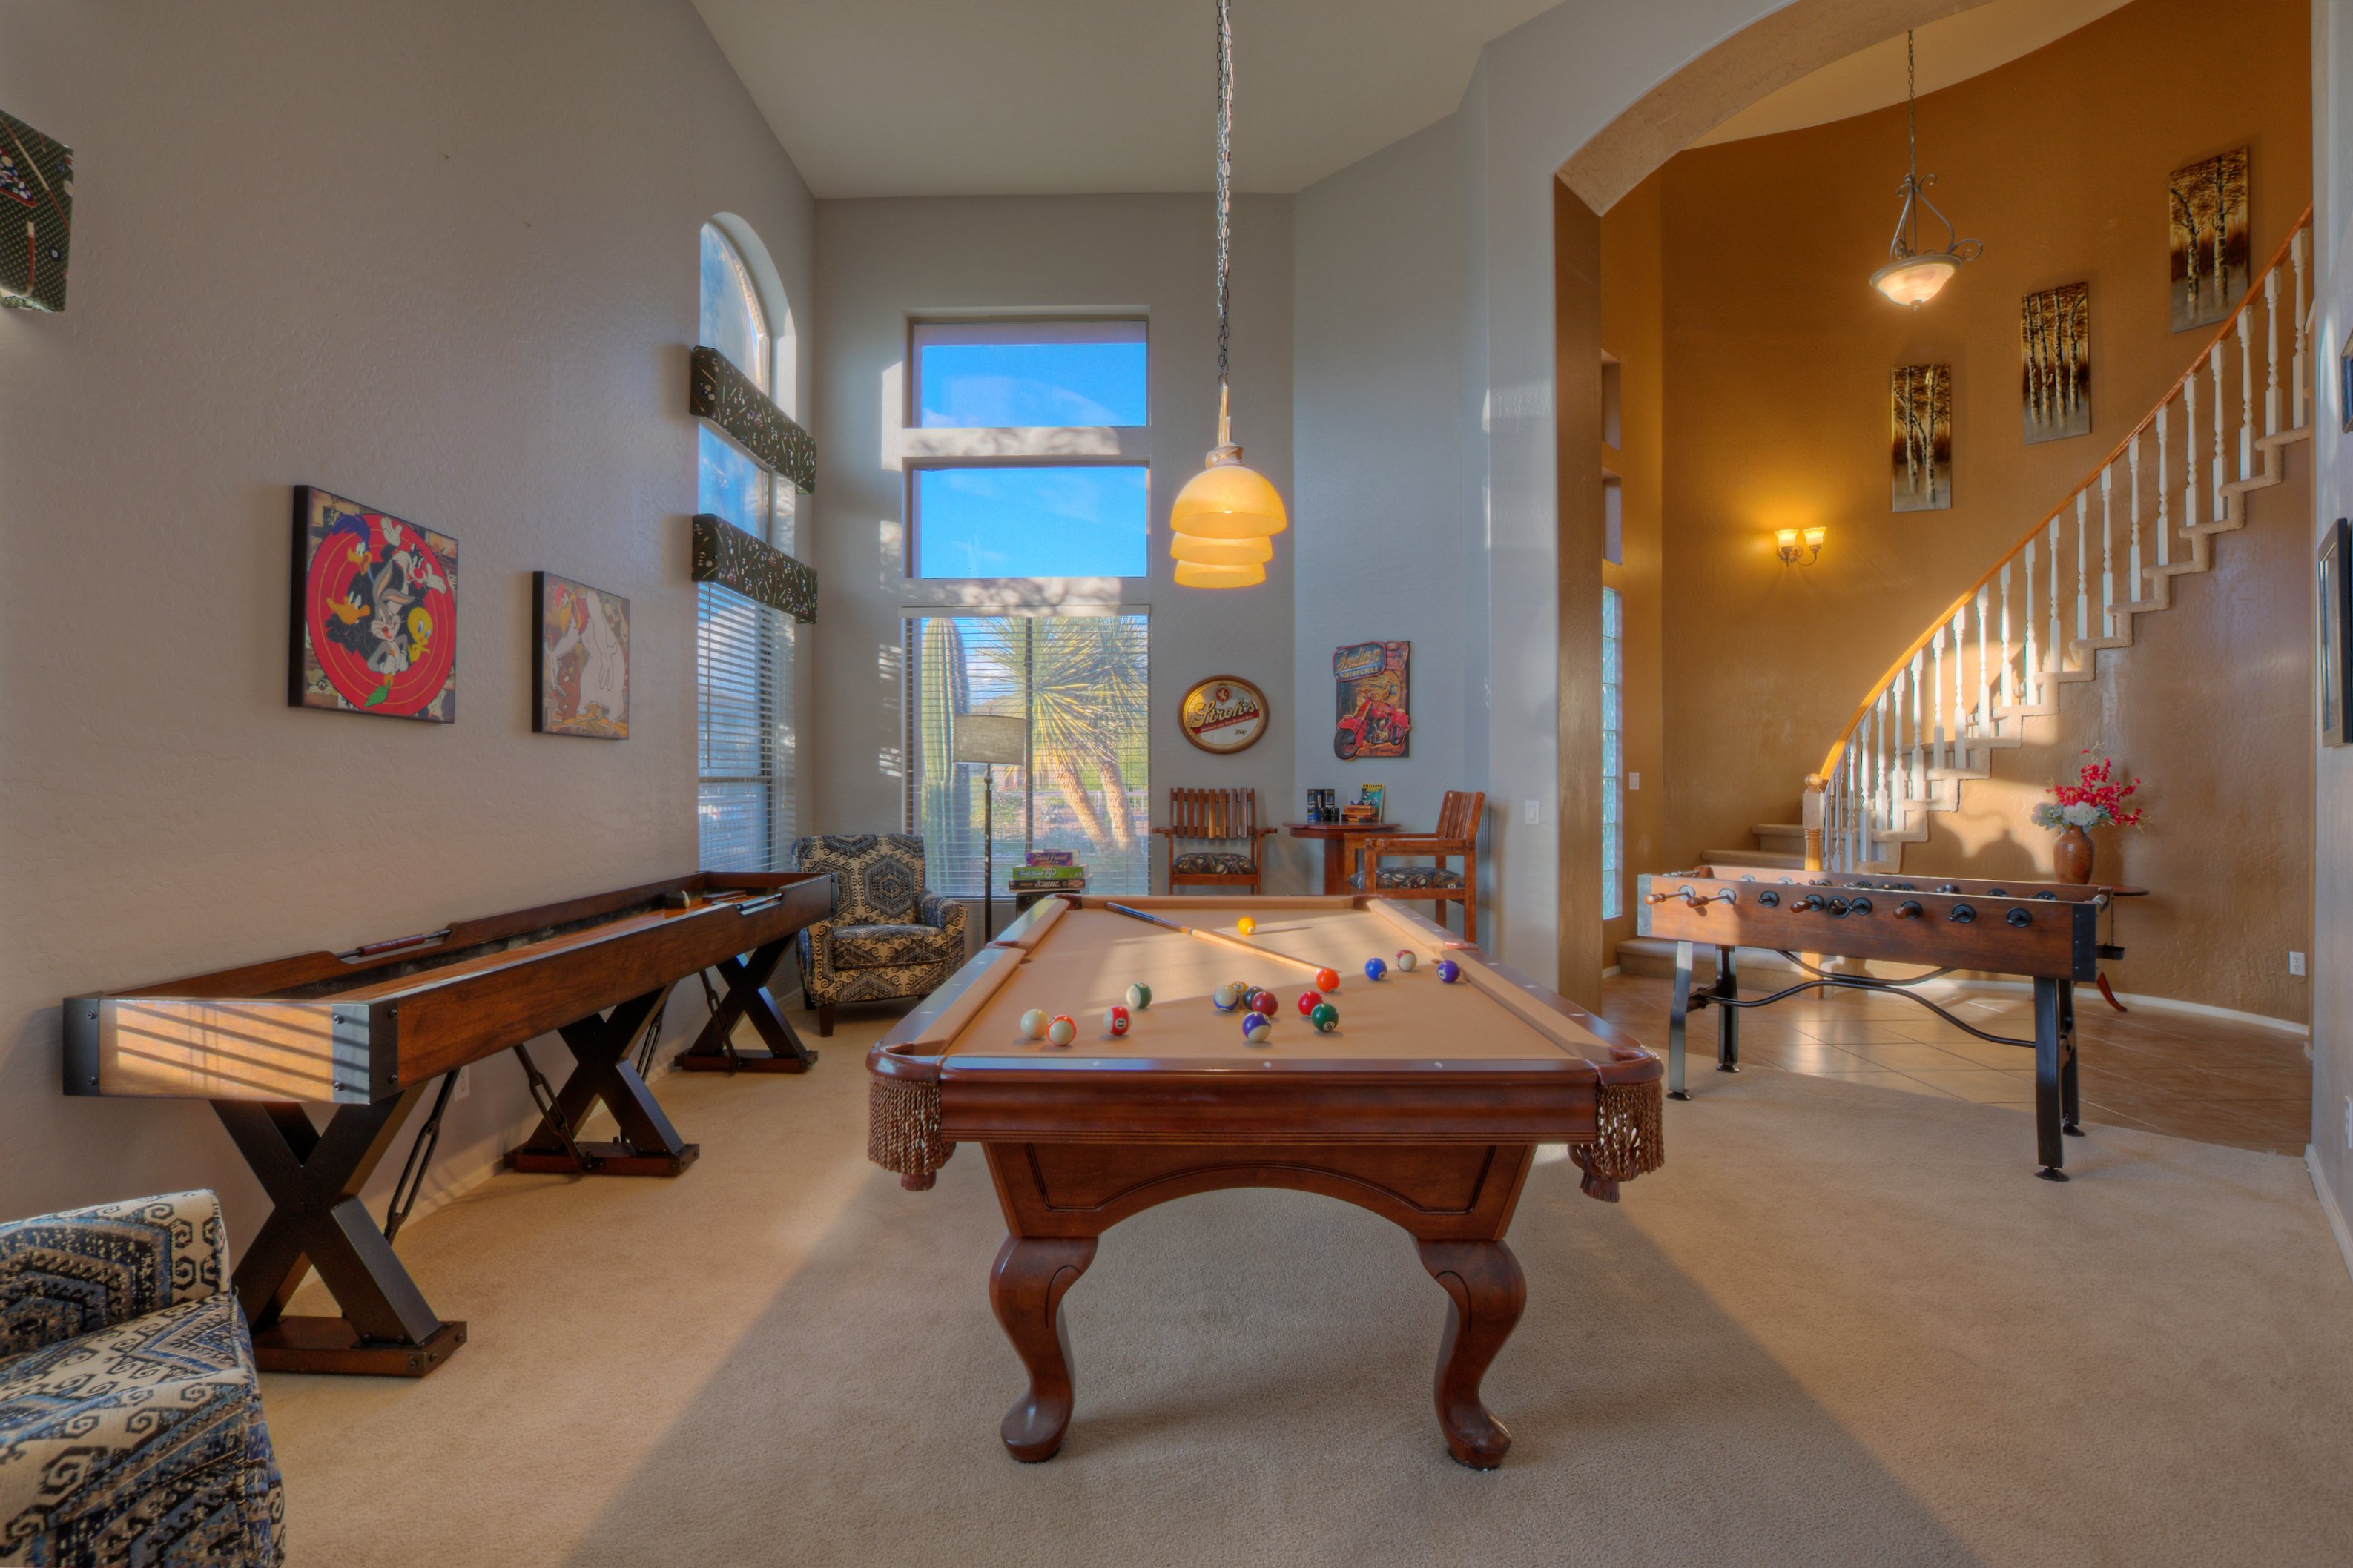 The naturally bright game room offers choices of pool, foosball, shuffleboard or Blackjack.